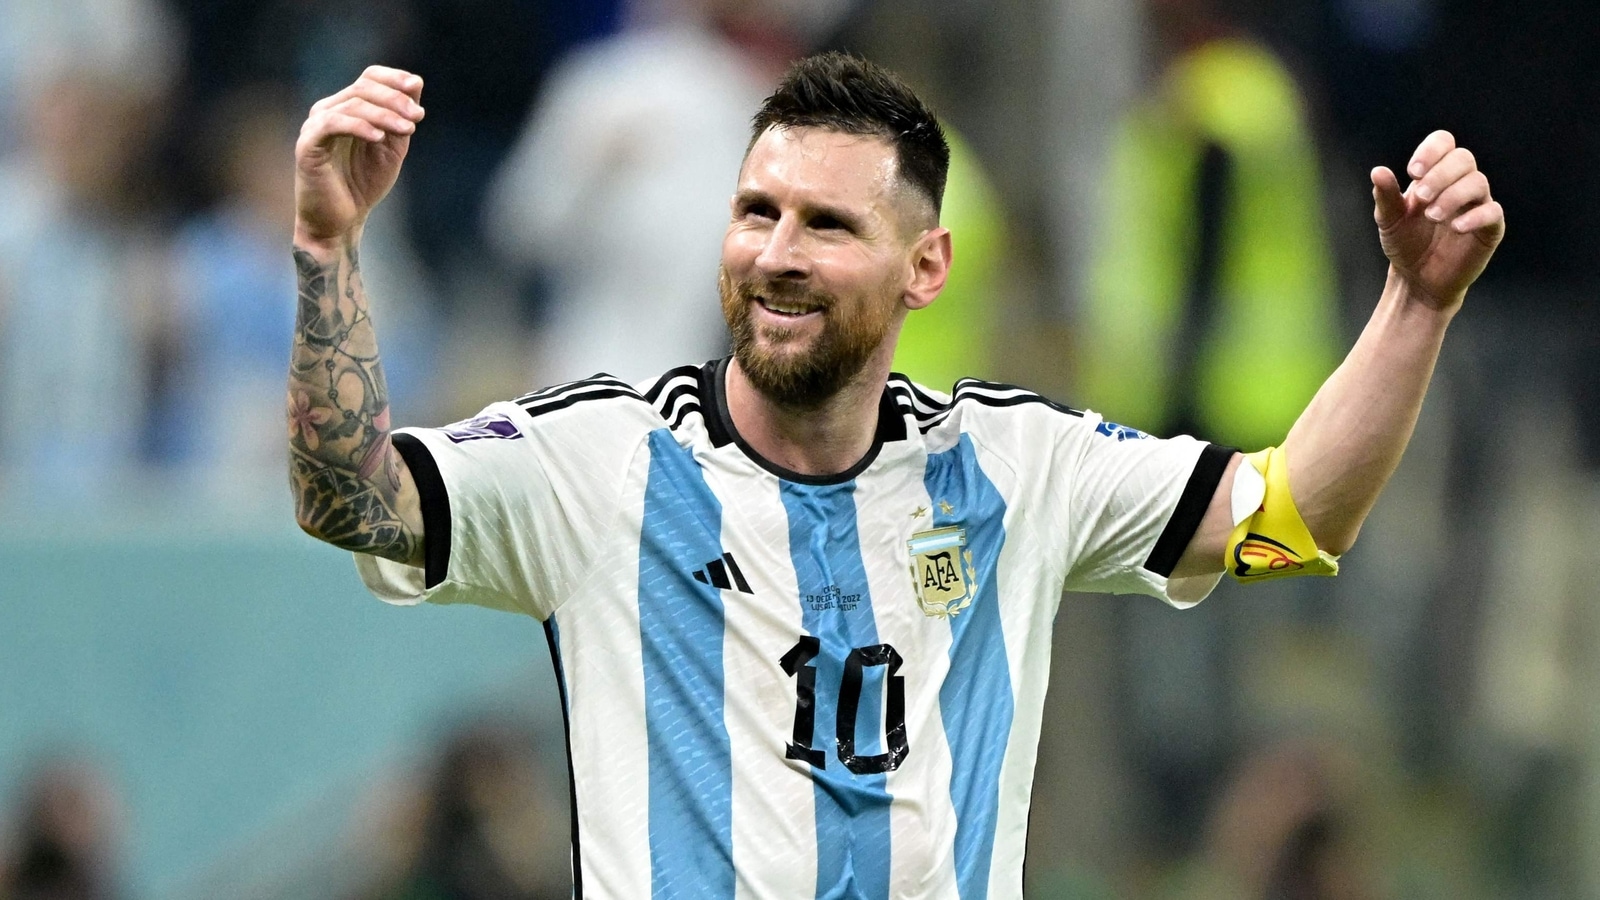 Lionel Messi: The legend looking for a new record in the World 11